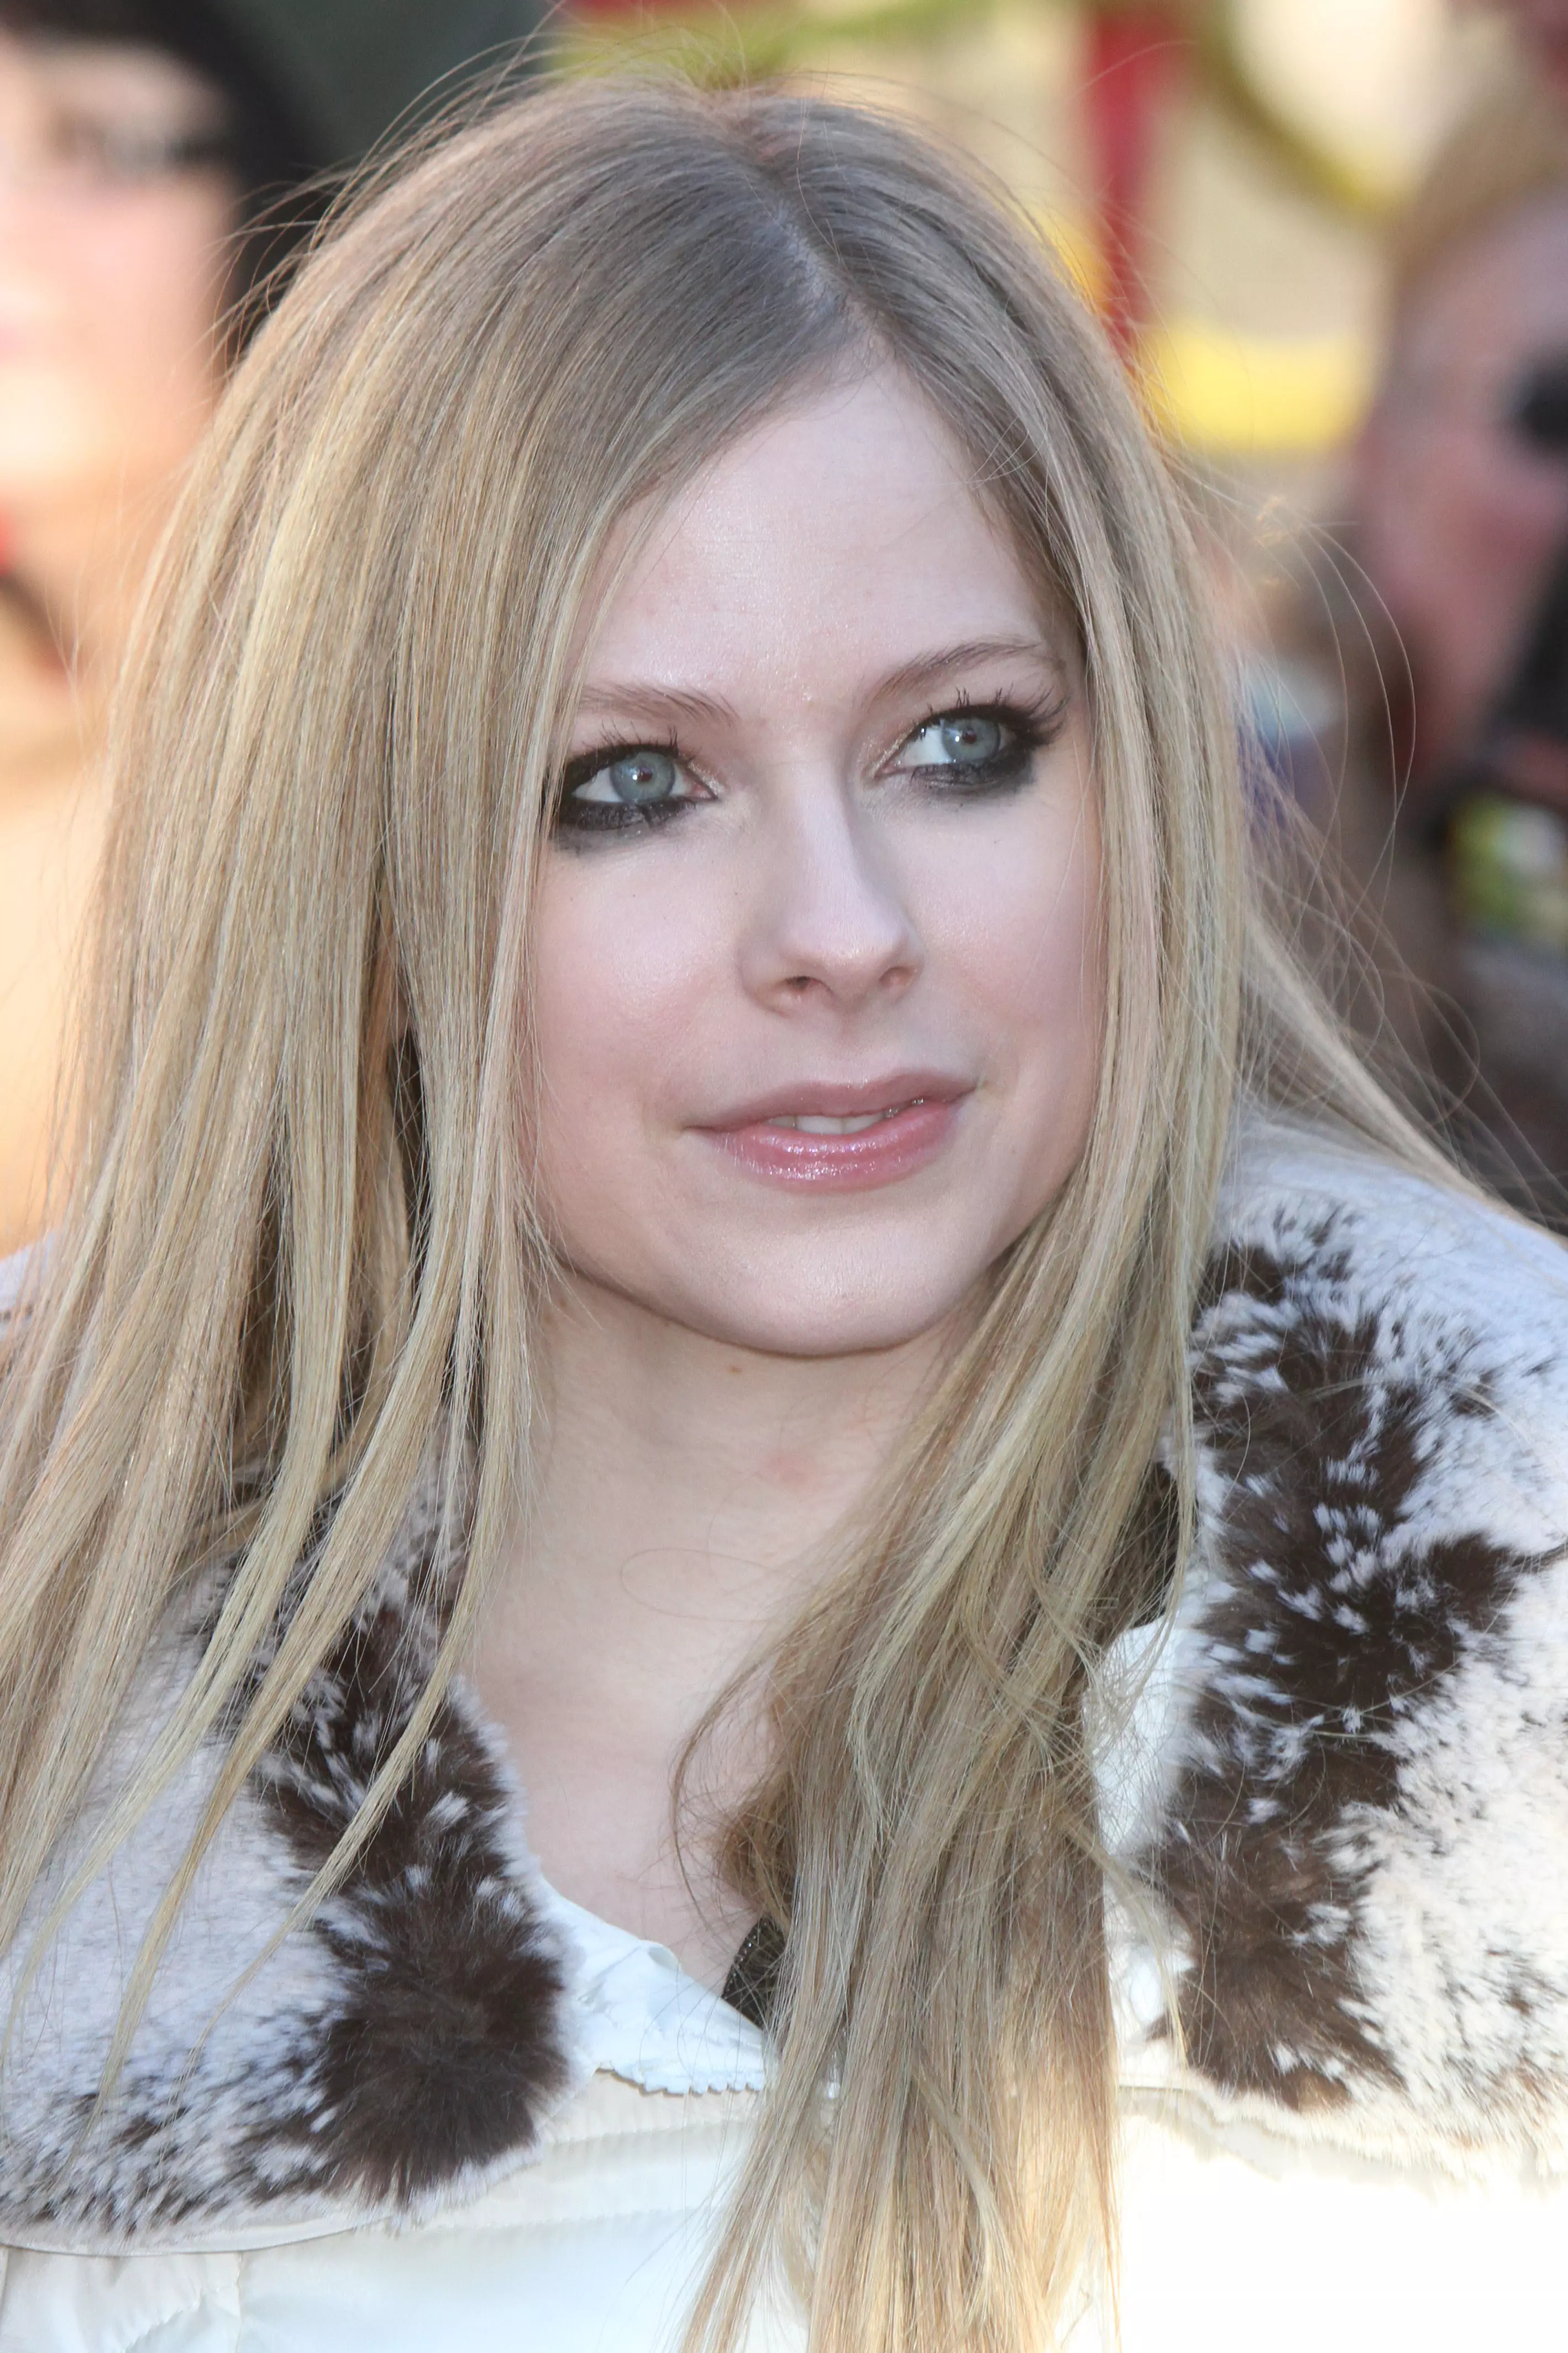 Avril says the rumours are ridiculous.